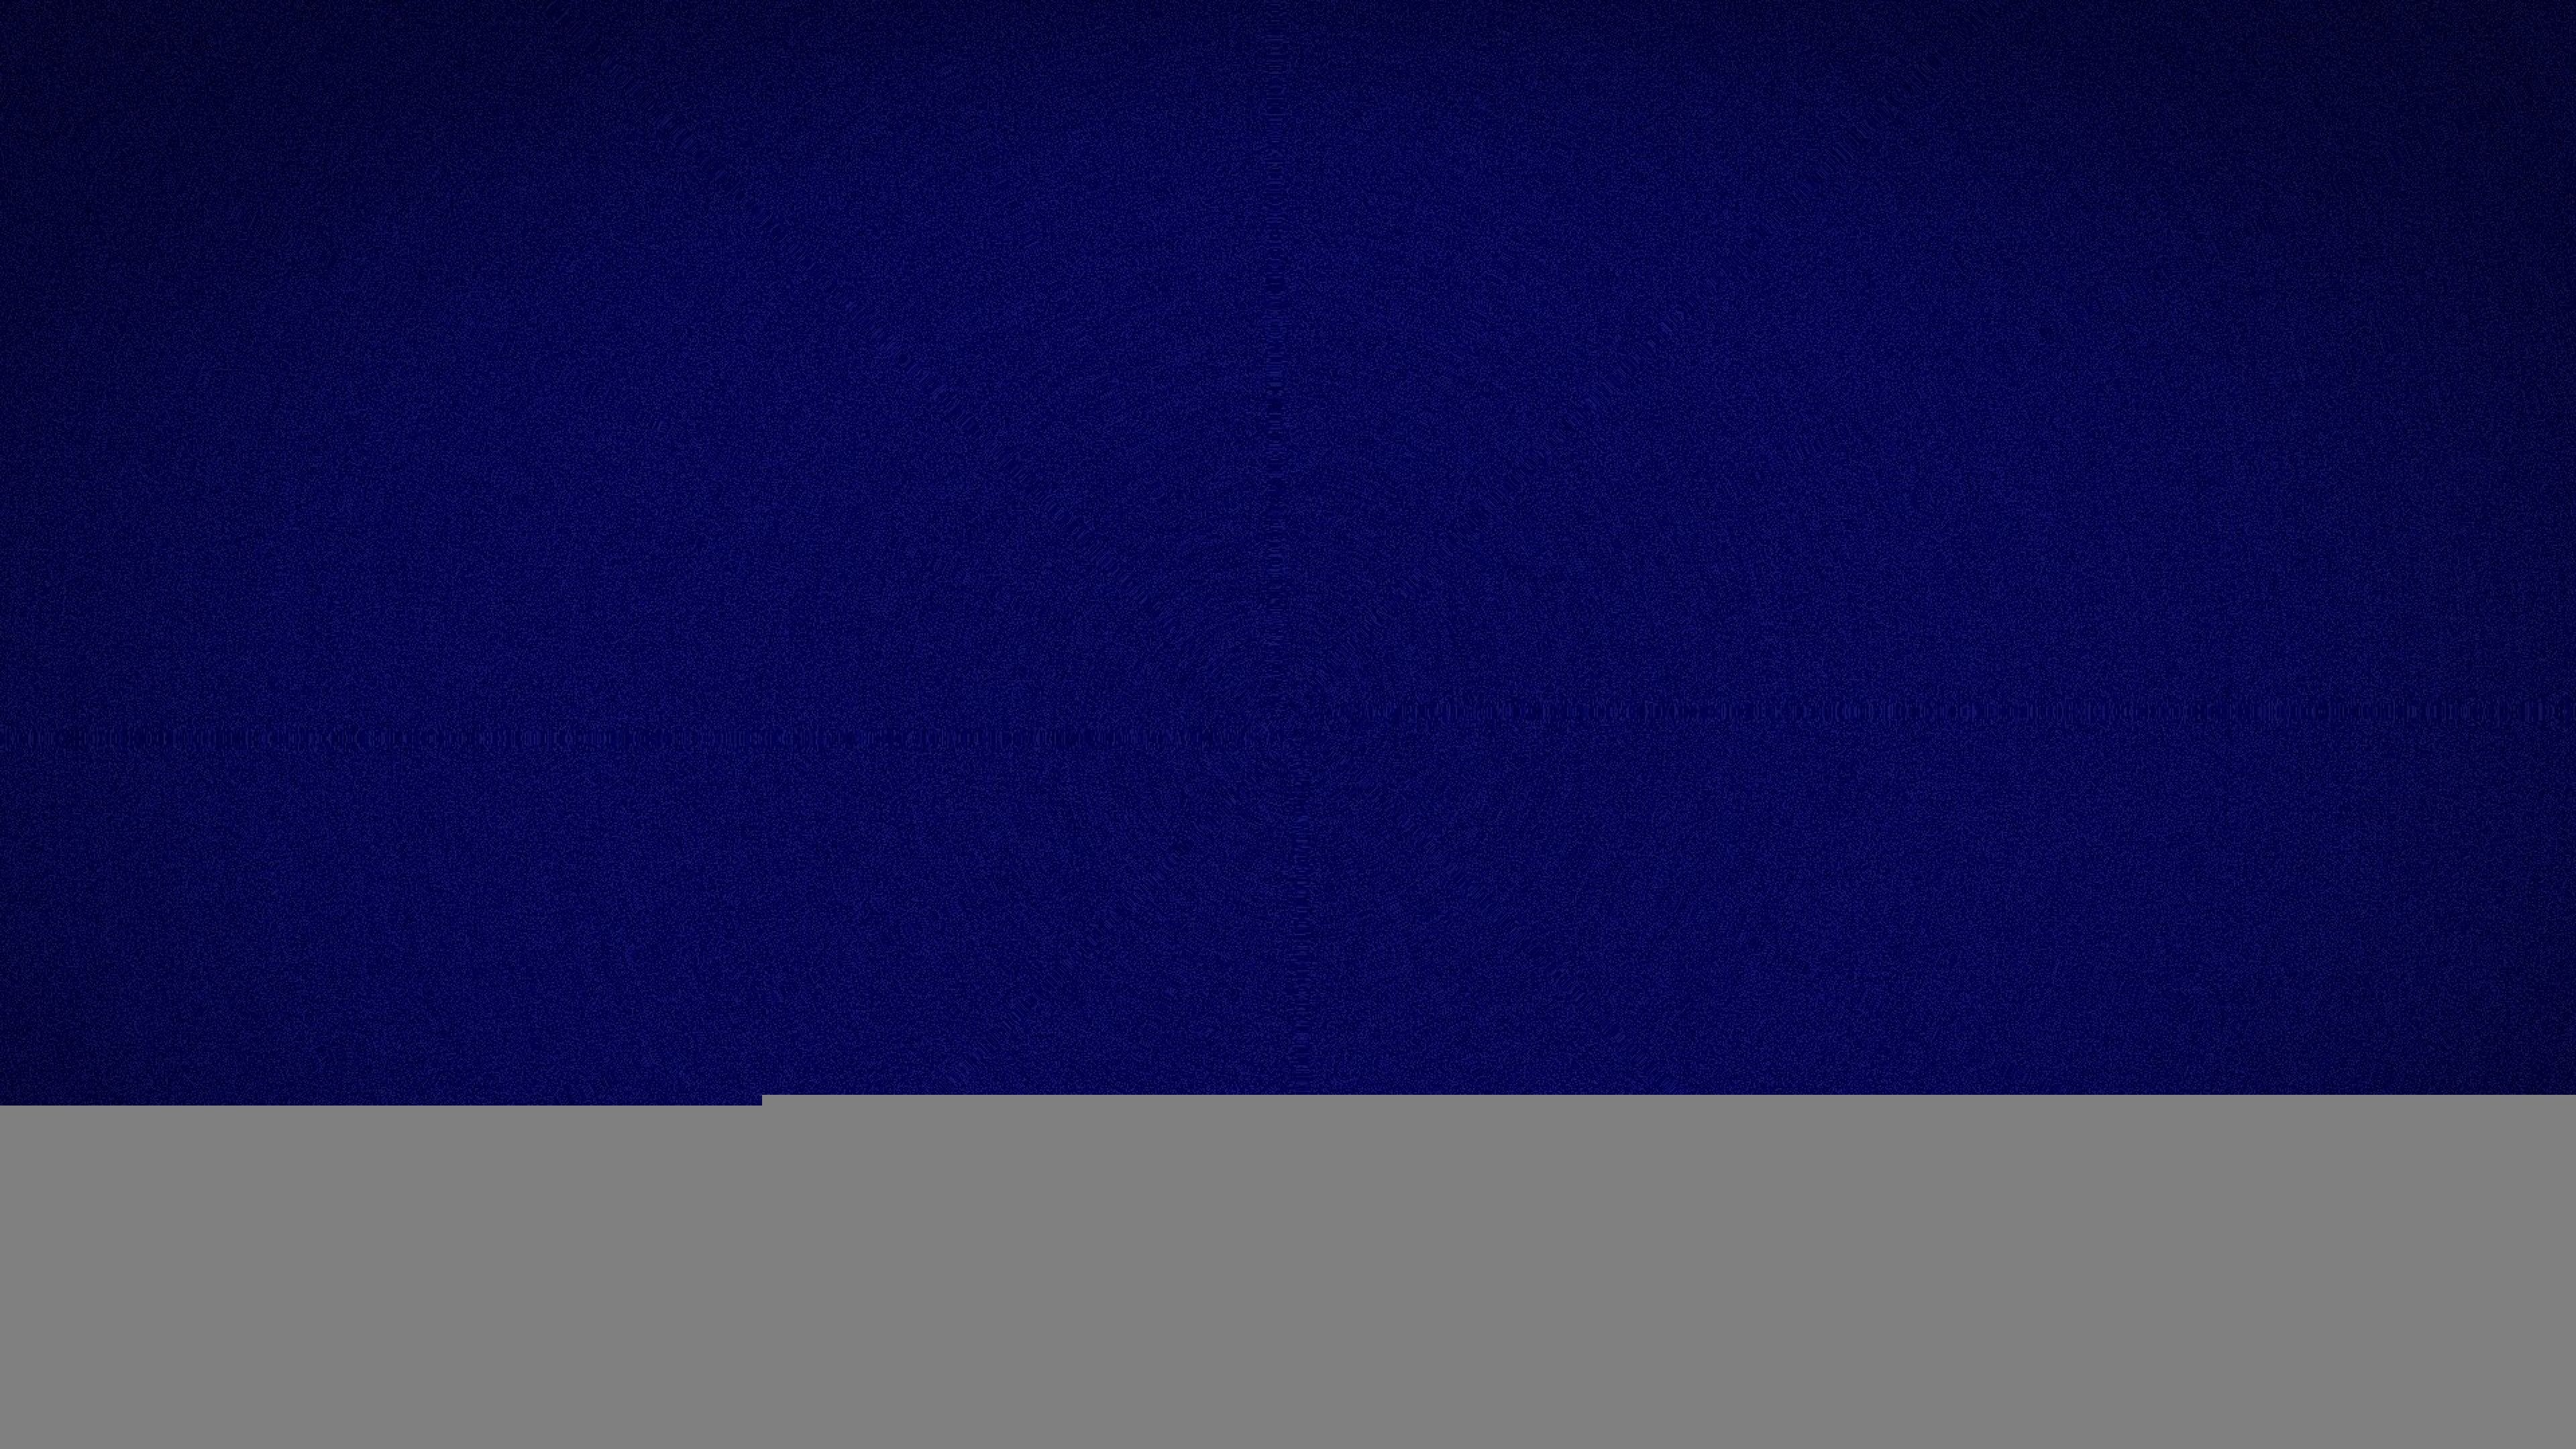 1920x1080 Navy Blue Solid Color Background